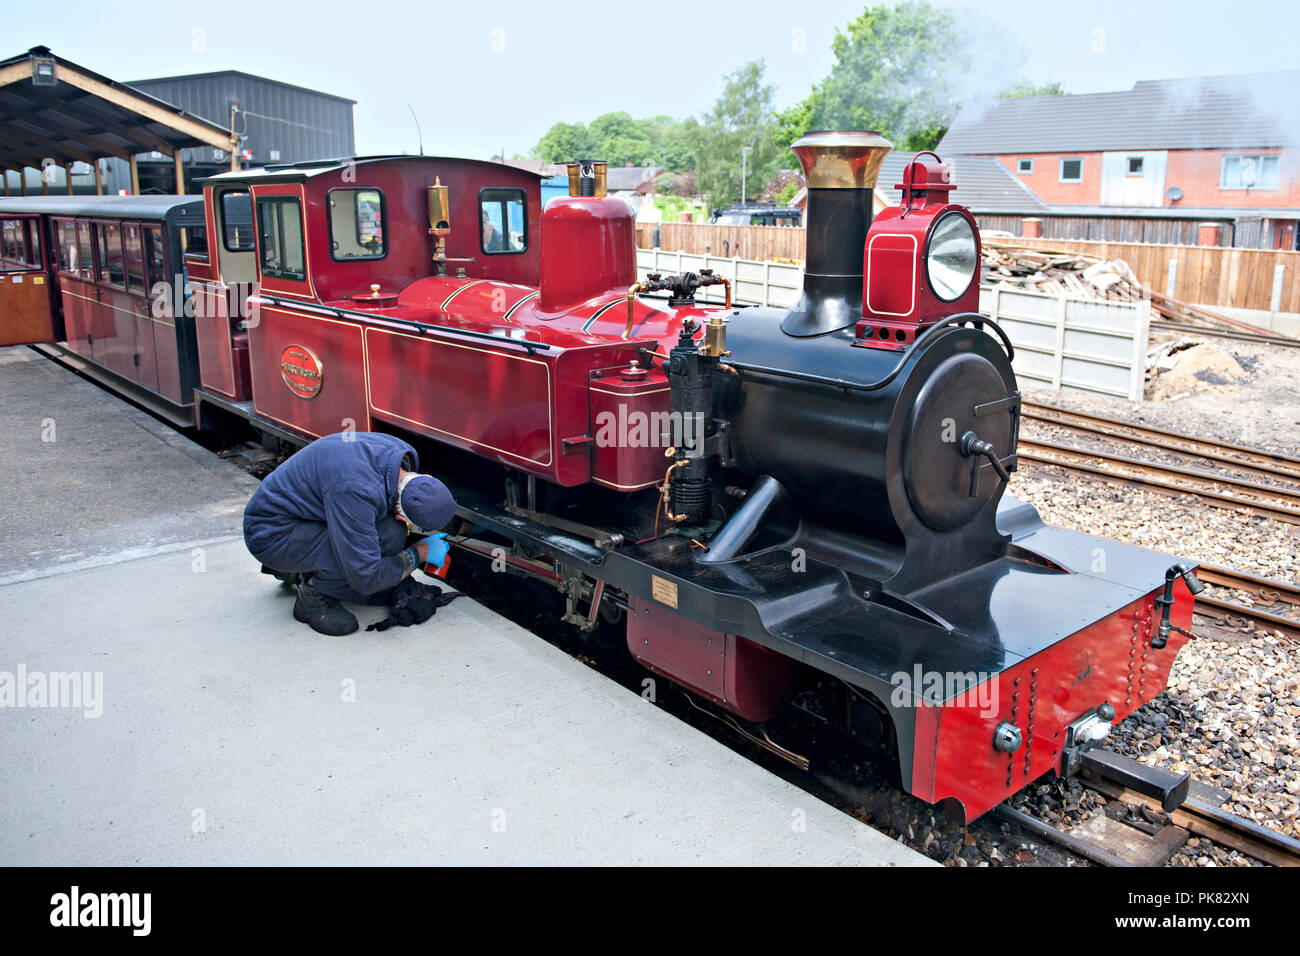 The 15 inch gauge steam locomotive 'Mark Timothy' at Hoveton & Wroxham station on the Bure Valley Railway in Norfolk, UK Stock Photo